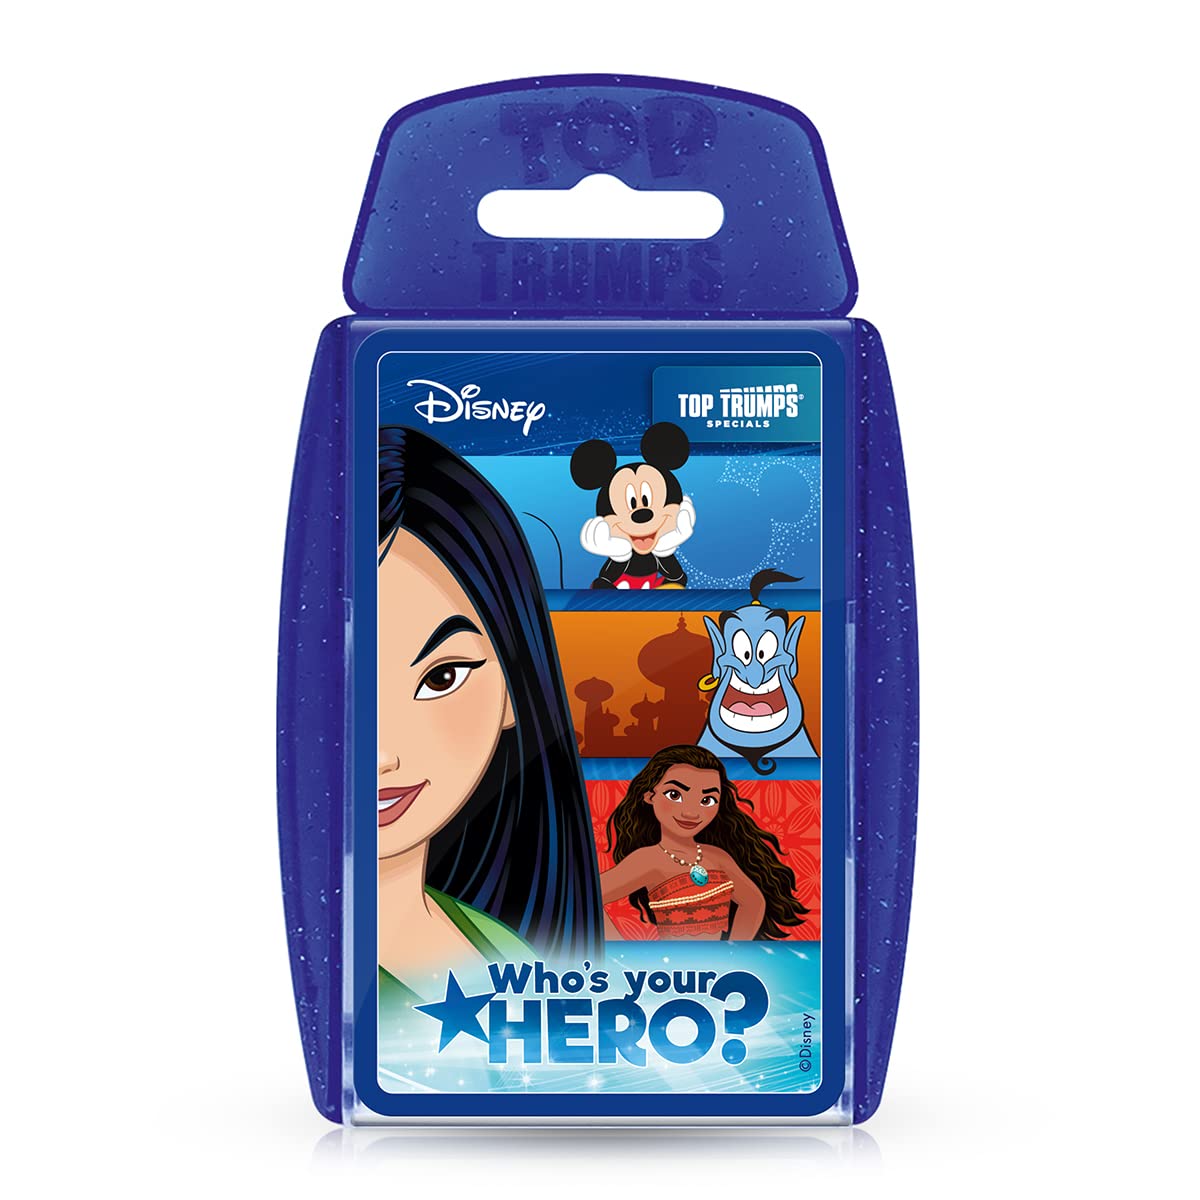 Top Trumps Disney Heroes Special Card Game; Entertaining Game Exploring Characters Like Mickey, Hercules, Mulan, Elsa, and More|Family Fun for Ages 6 & up